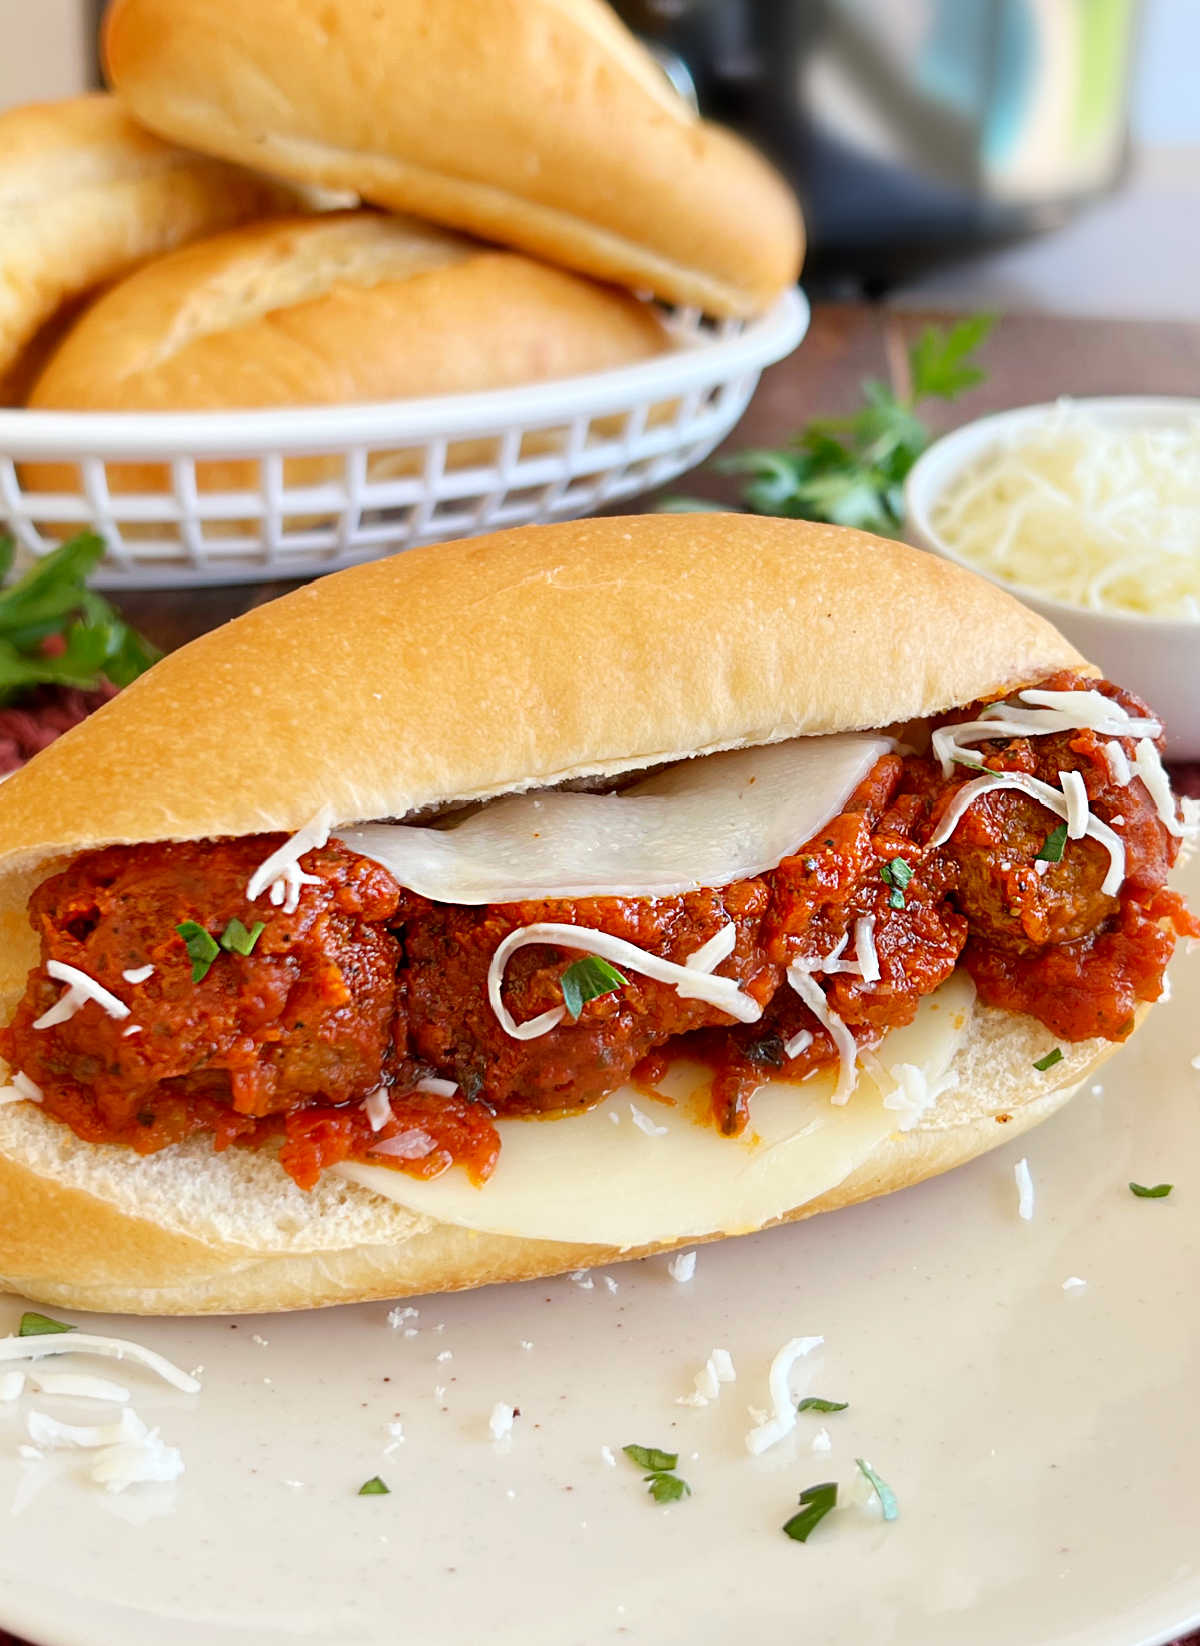 meatball sub sandwich with cheese and marinara sauce made with frozen meatballs